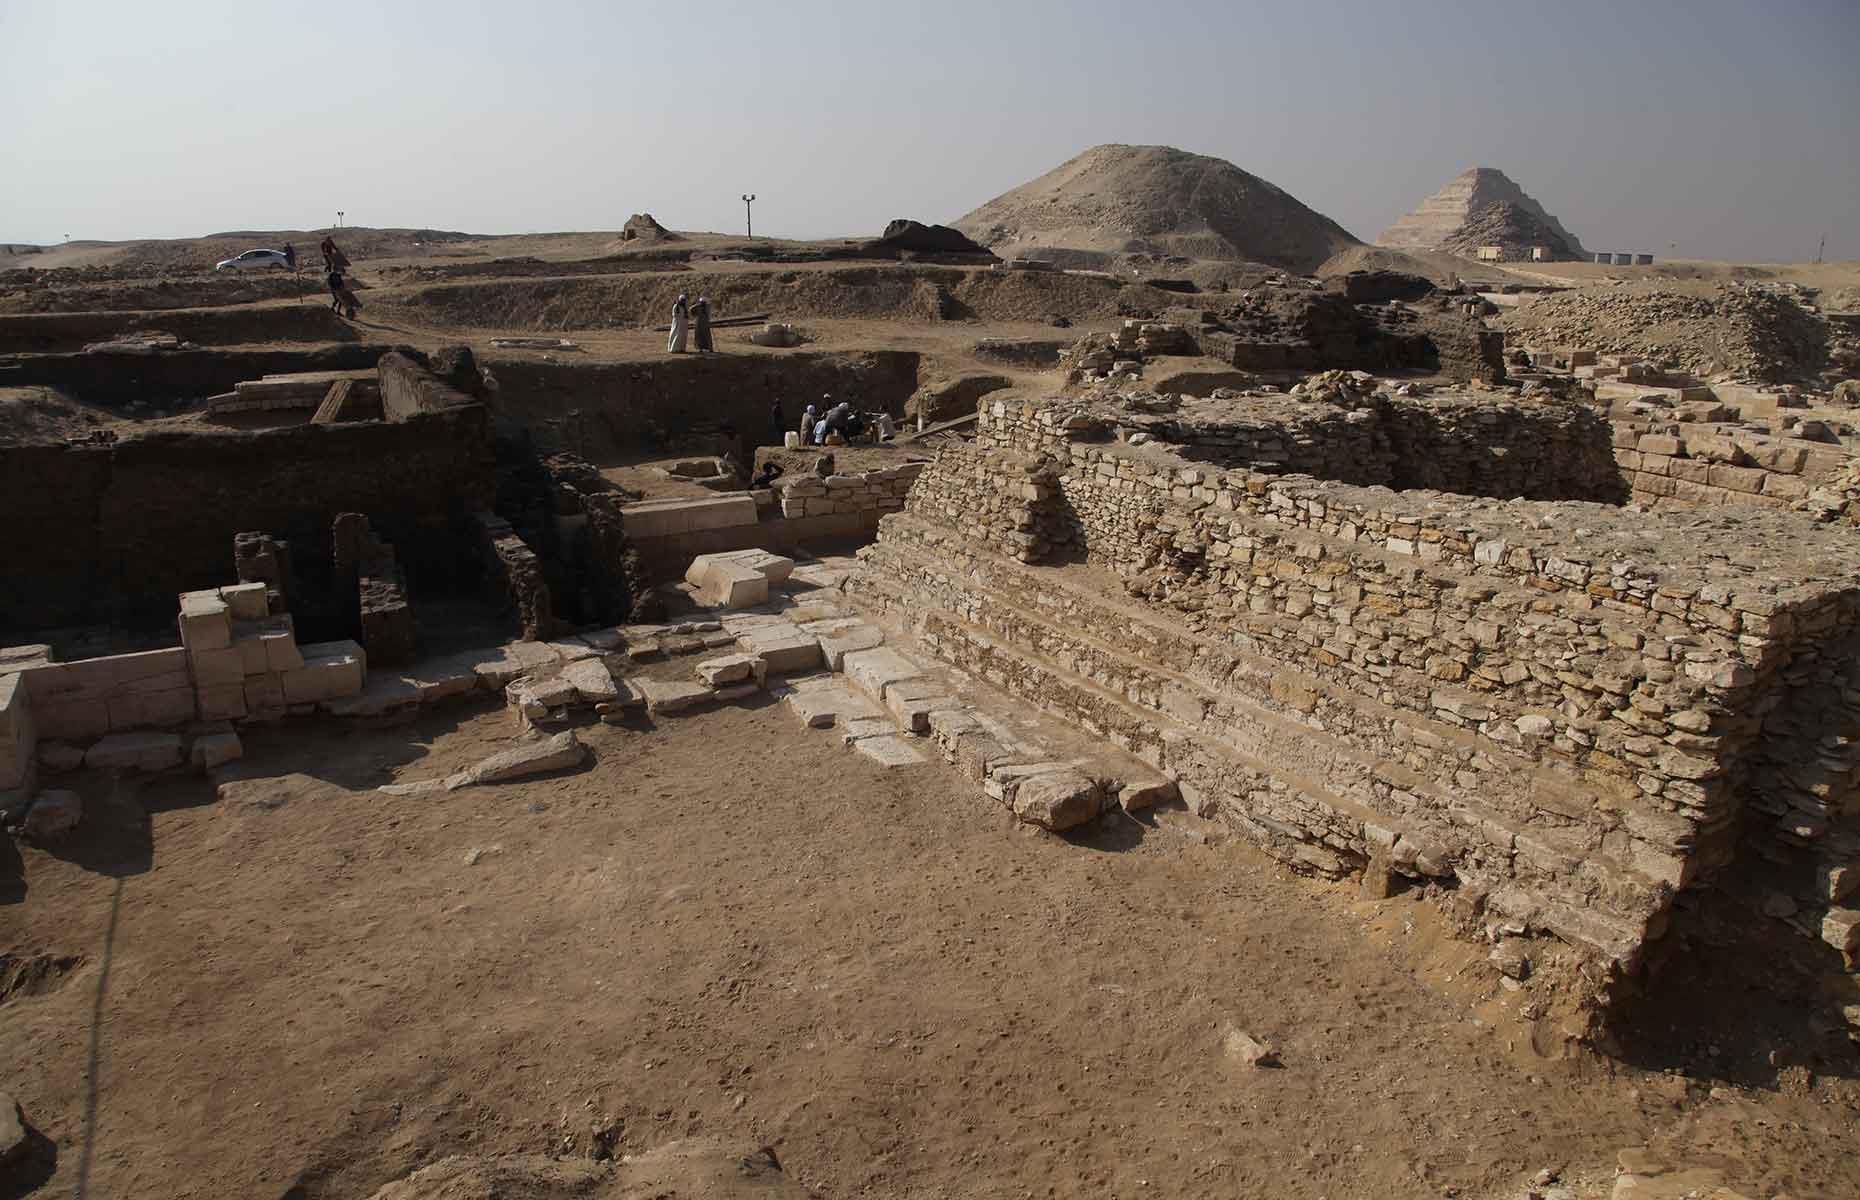 <p>Archaeologists also uncovered the pyramid of a previously unknown Egyptian queen named Neith. Pictured here is the excavated site, with the Teti and Djoser pyramids visible in the background. Neith was likely named after the Egyptian <a href="http://egyptianmuseum.org/deities-neith">goddess</a> of creation, wisdom, weaving and war, as well as being worshipped as a funerary goddess.</p>